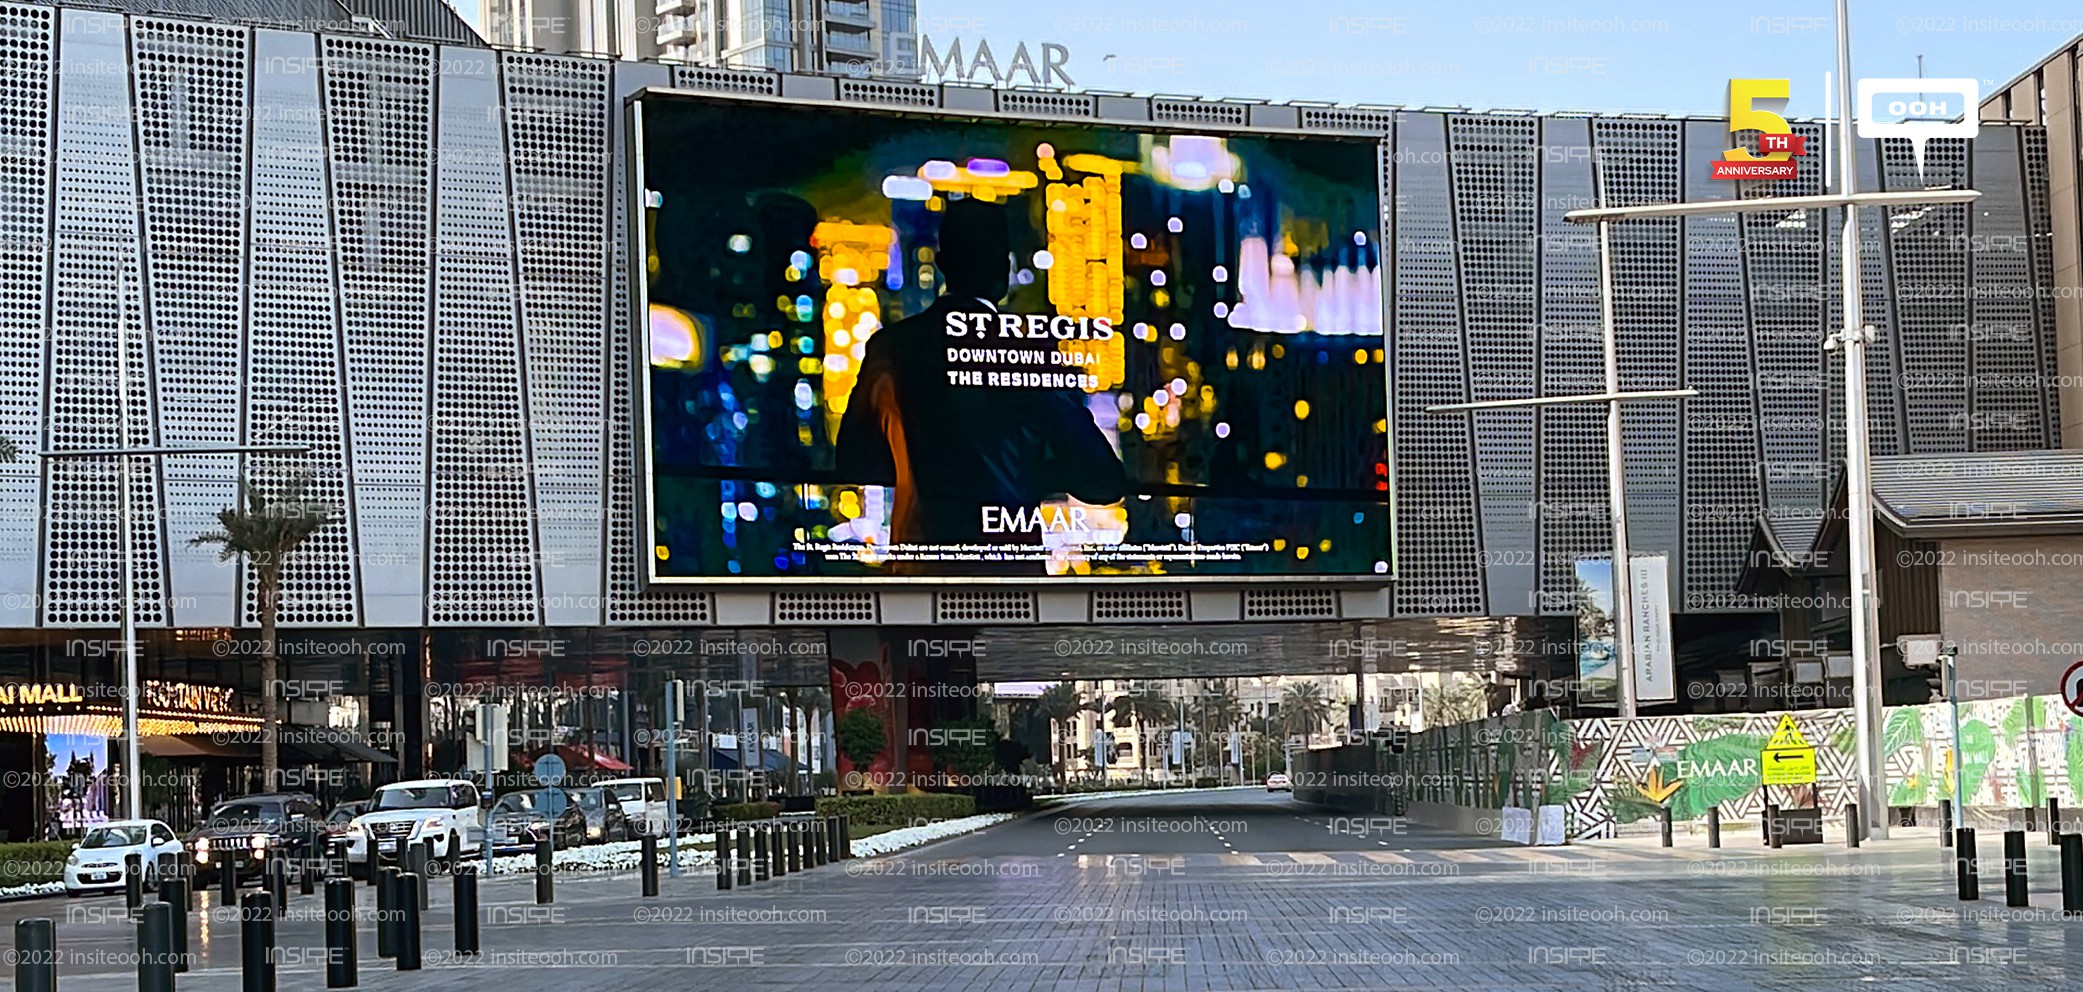 LOUIS VUITTON Presents An Immersive Experience of A Floating Exhibition on  Dubai's Billboards, SEE LV - INSITE OOH Media Platform